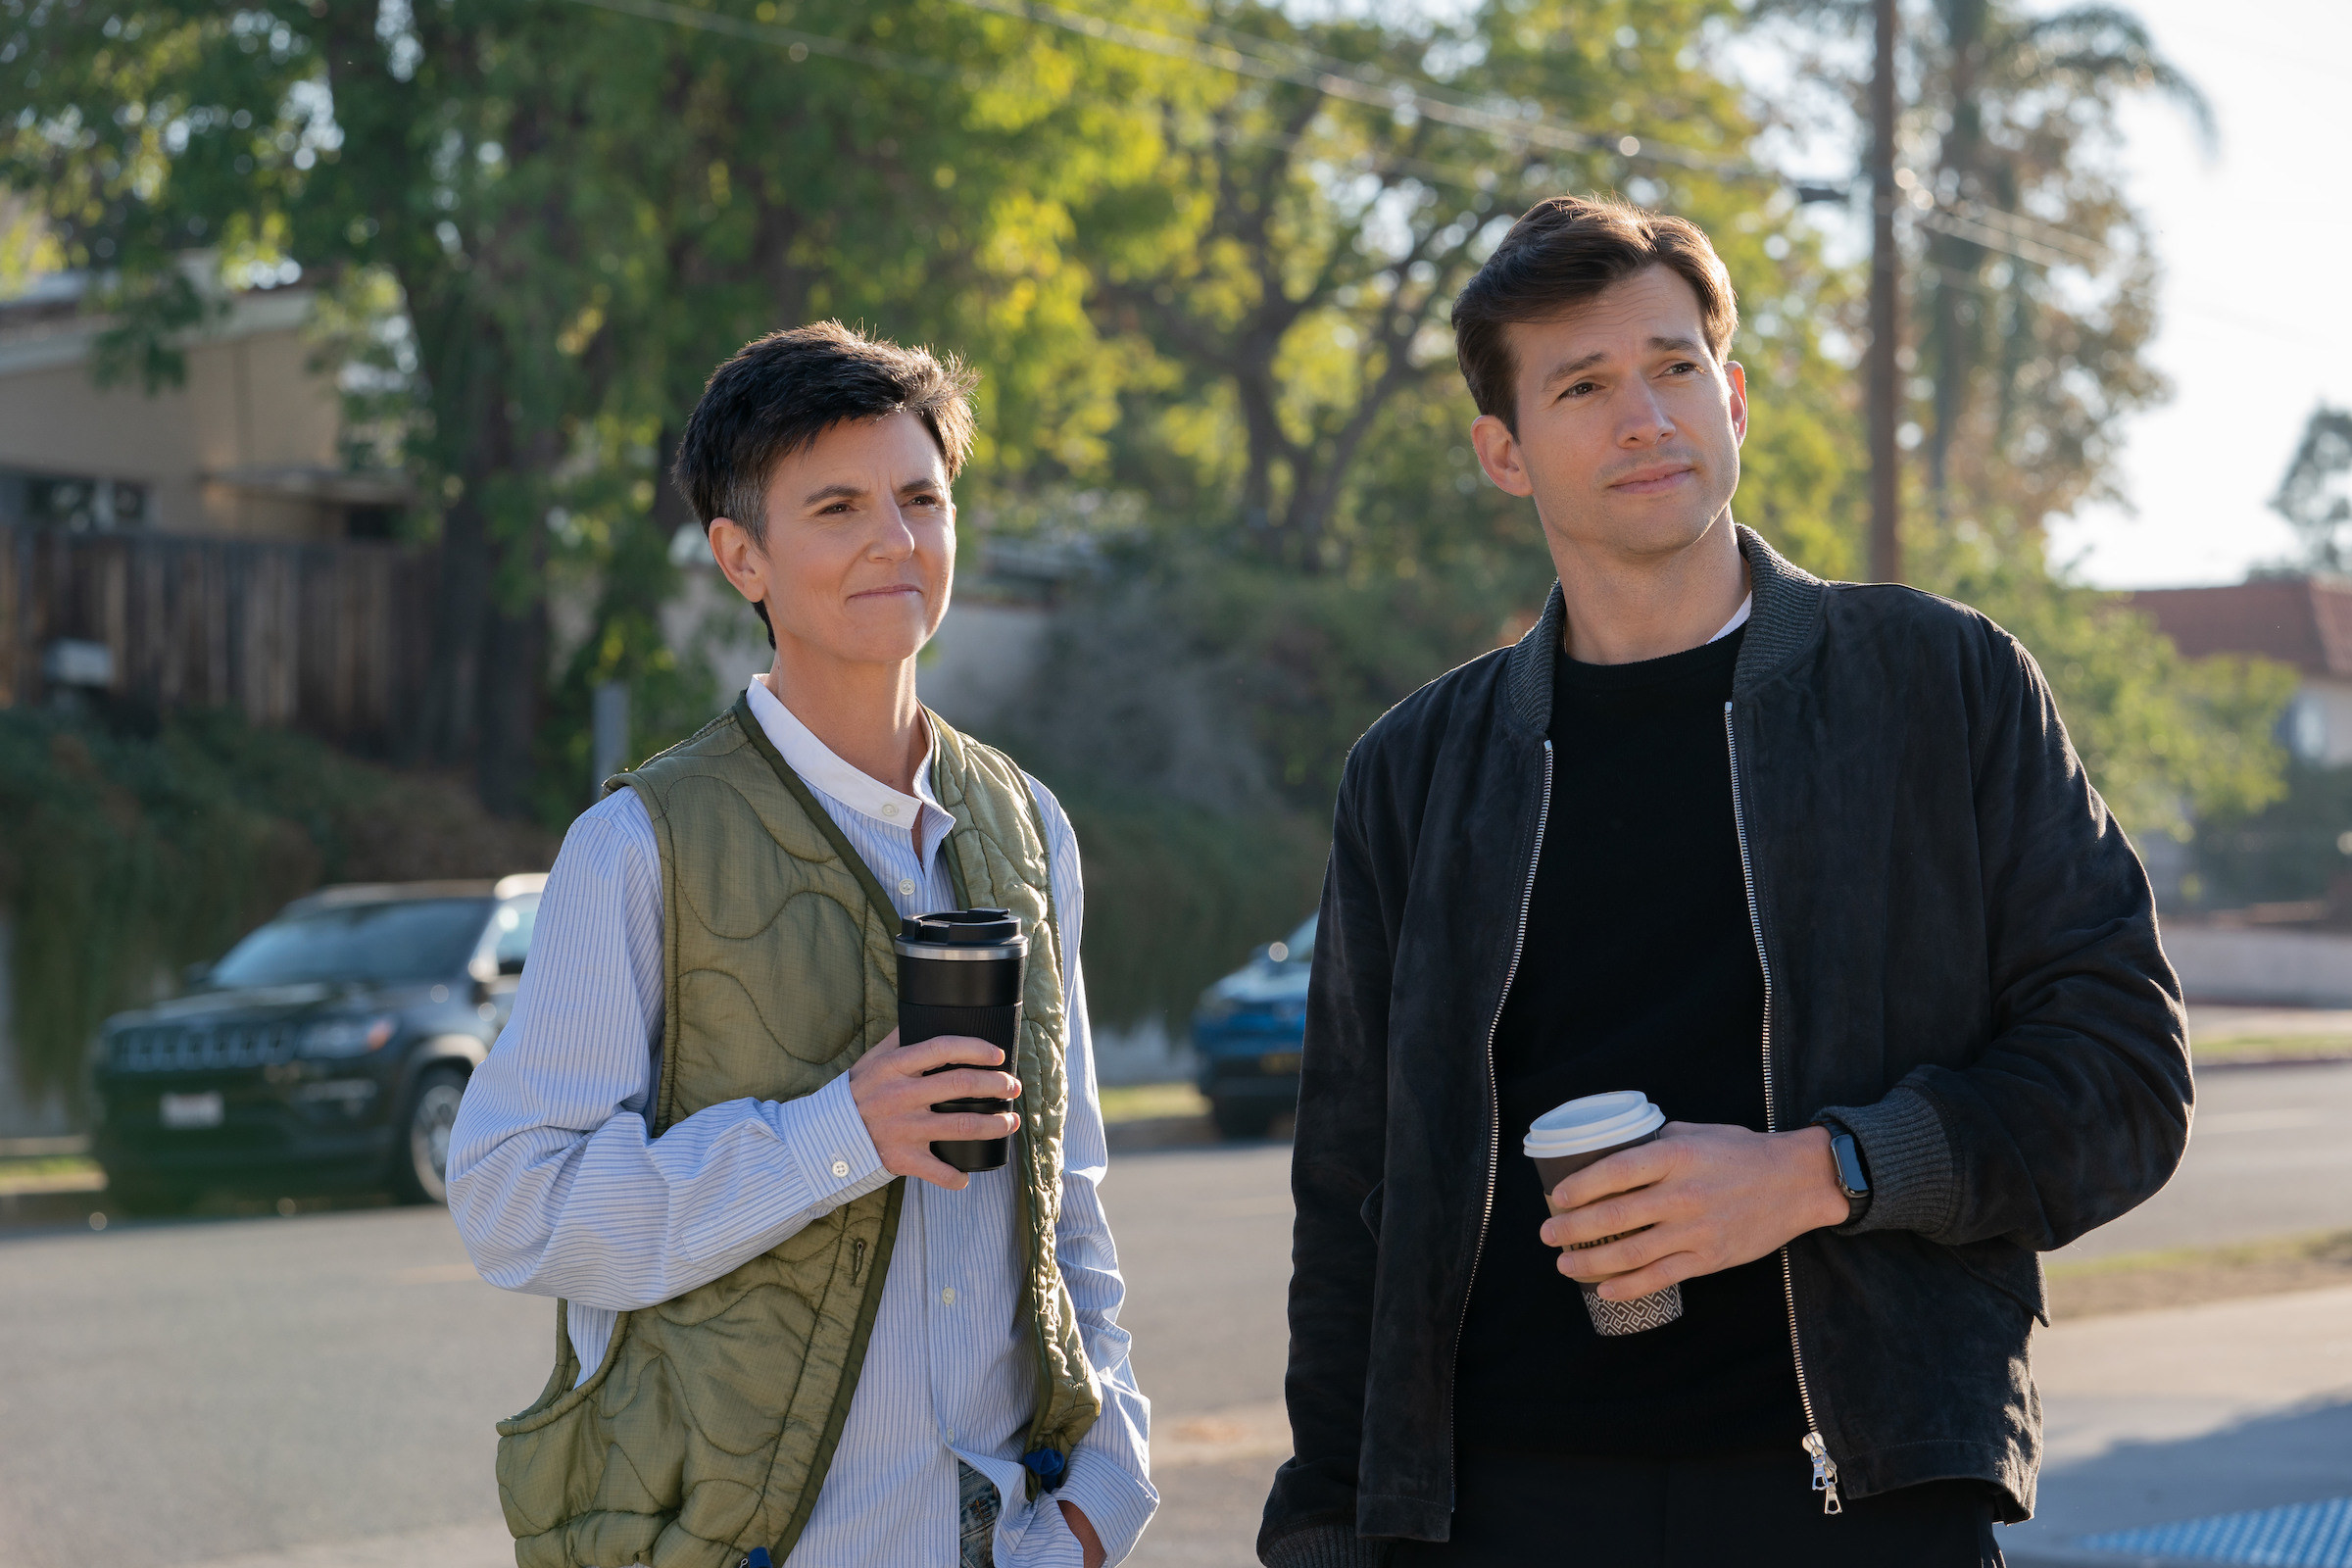 Tig Notaro and Ashton standing outside and holding coffee in a scene from the film